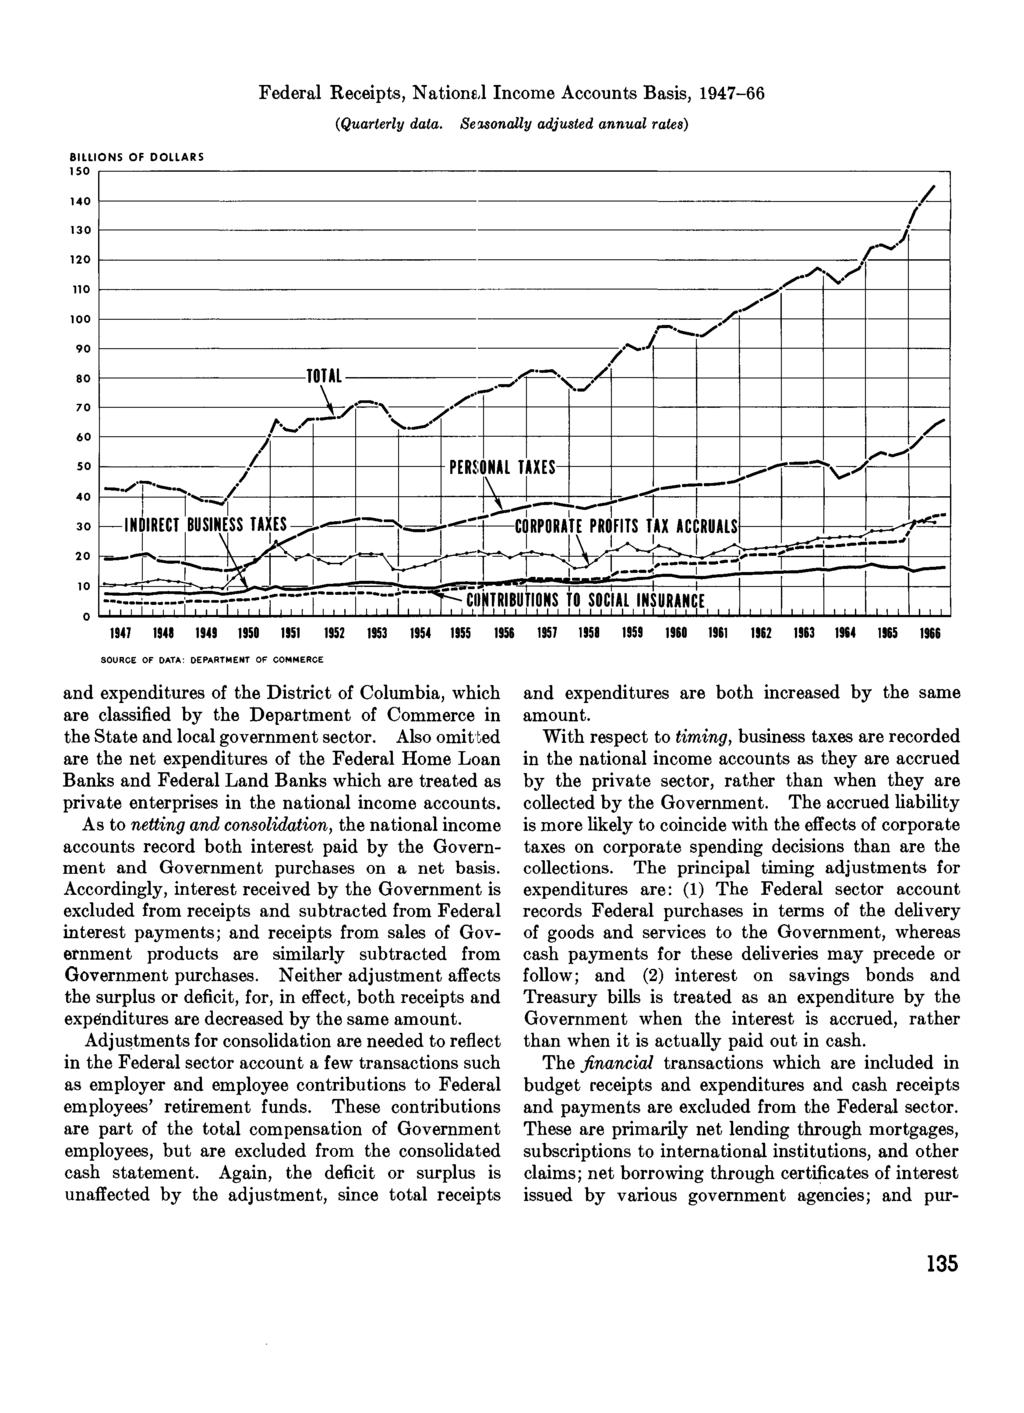 Federal Receipts, National Income Accounts Basis, 1947-66 (Quarterly data.